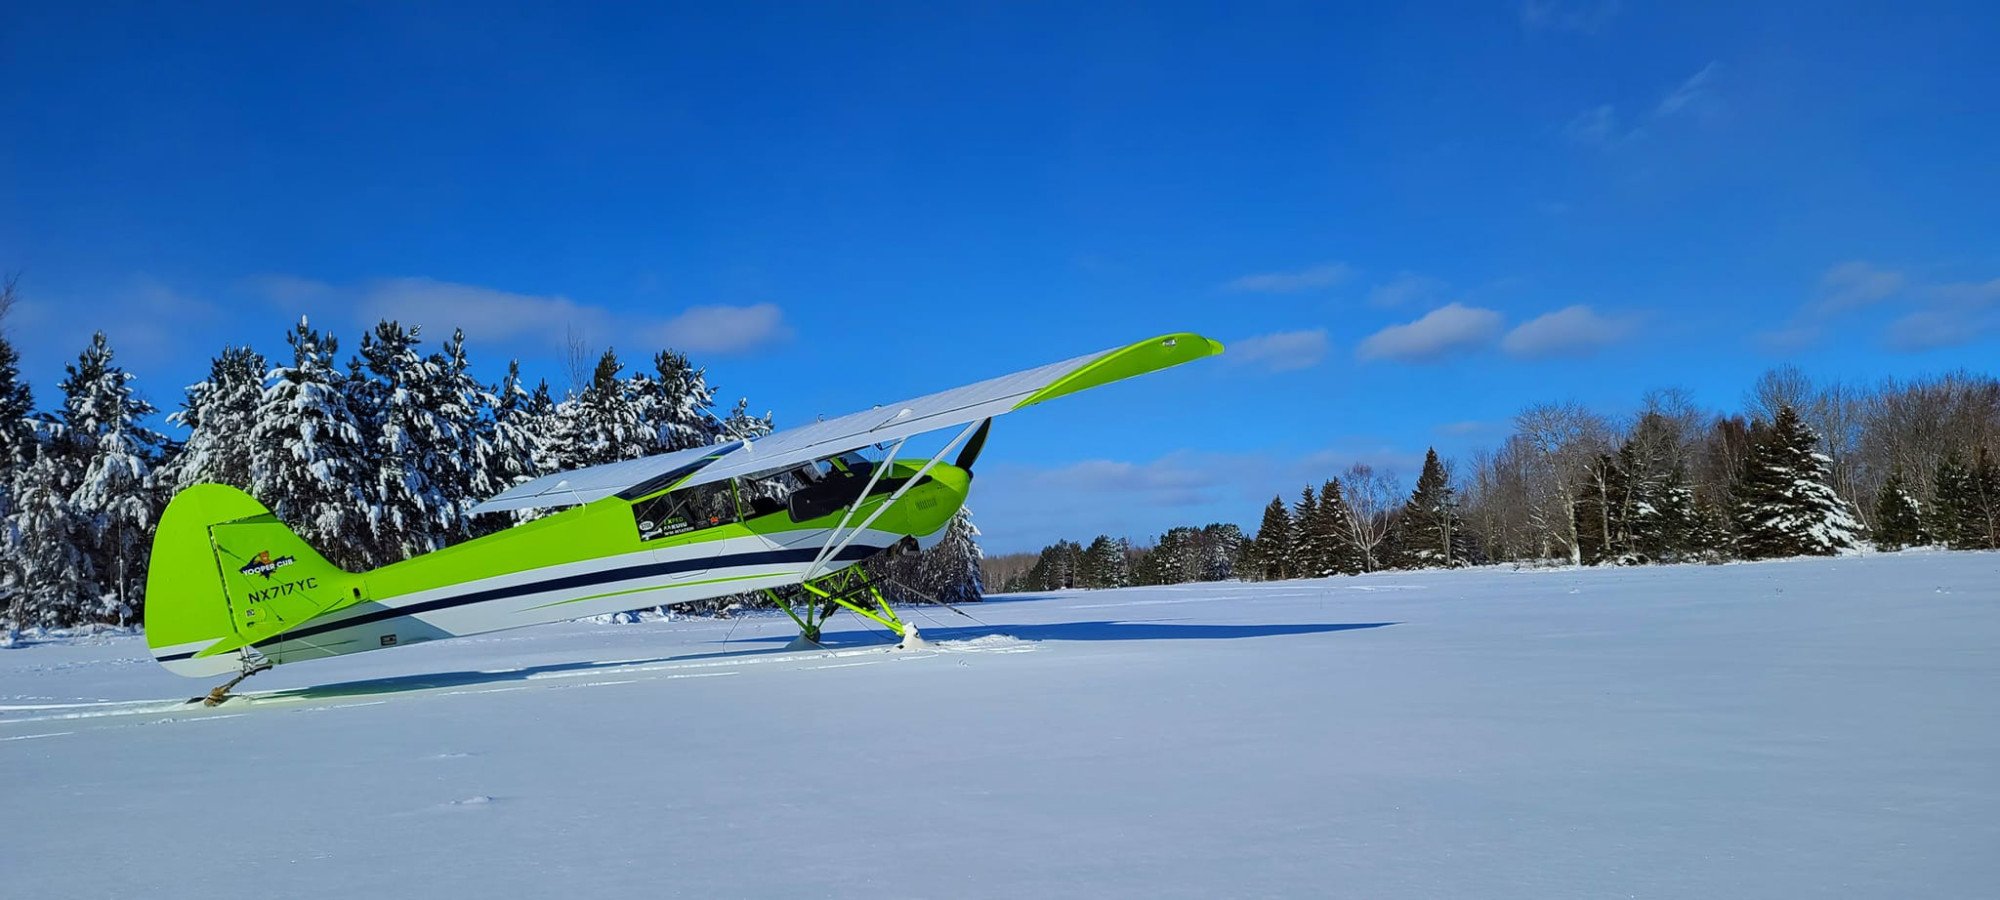 Rick's Yooper 1.0 on skis and ready for some winter airport shenanigans. 